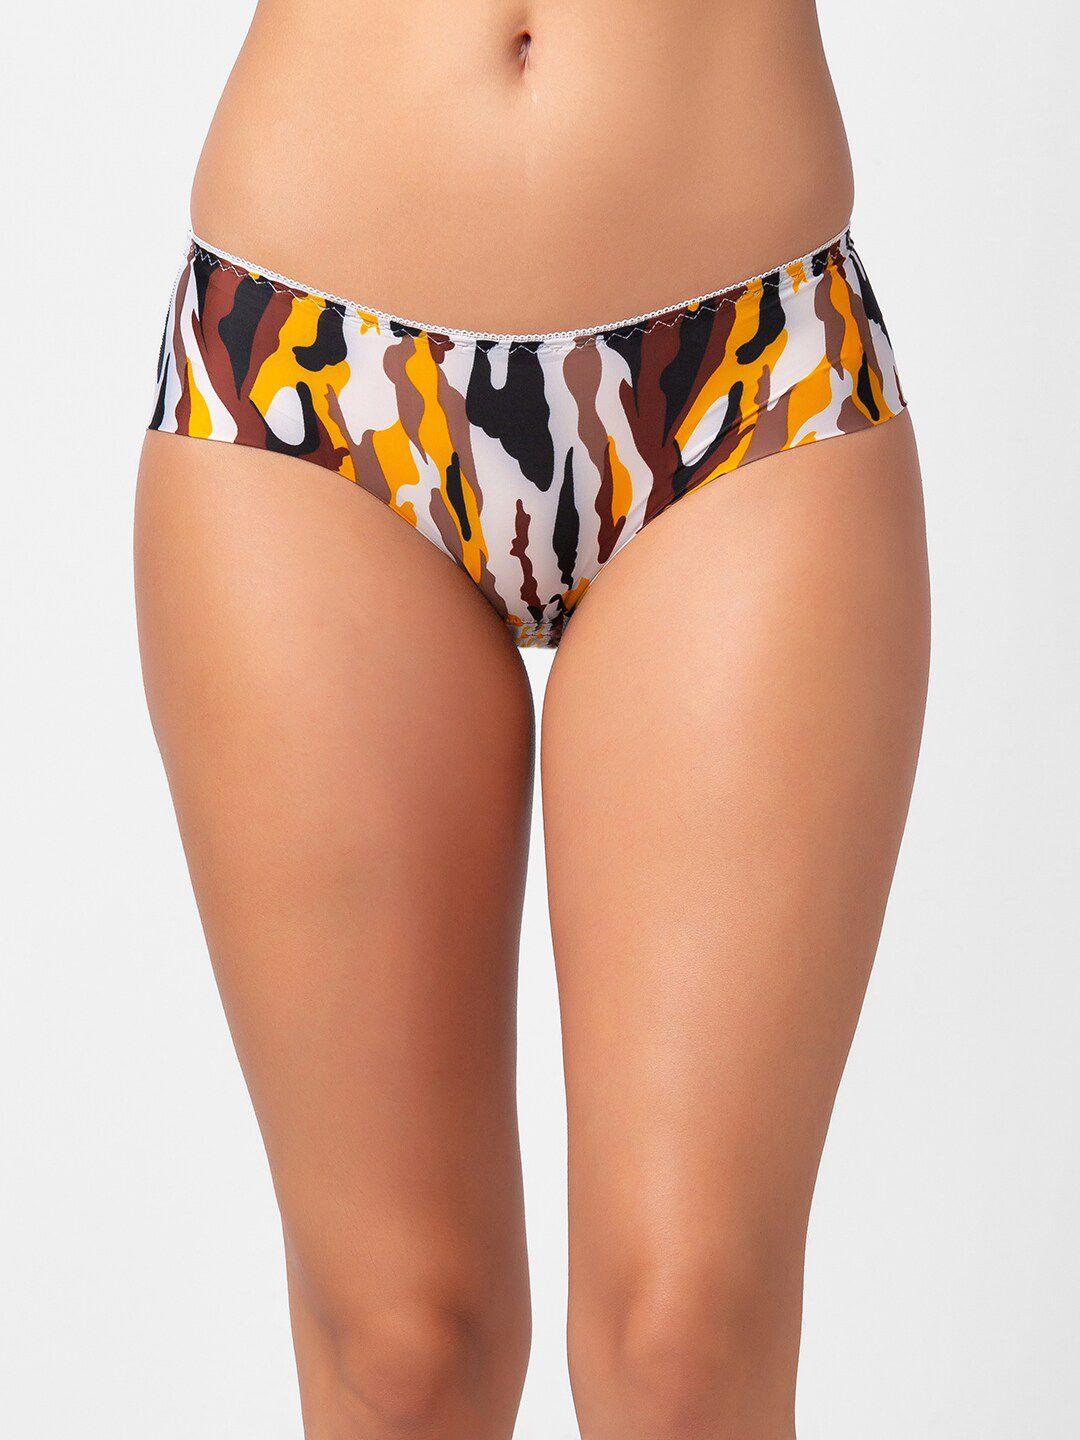 fashionrack-abstract-printed-hipster-briefs